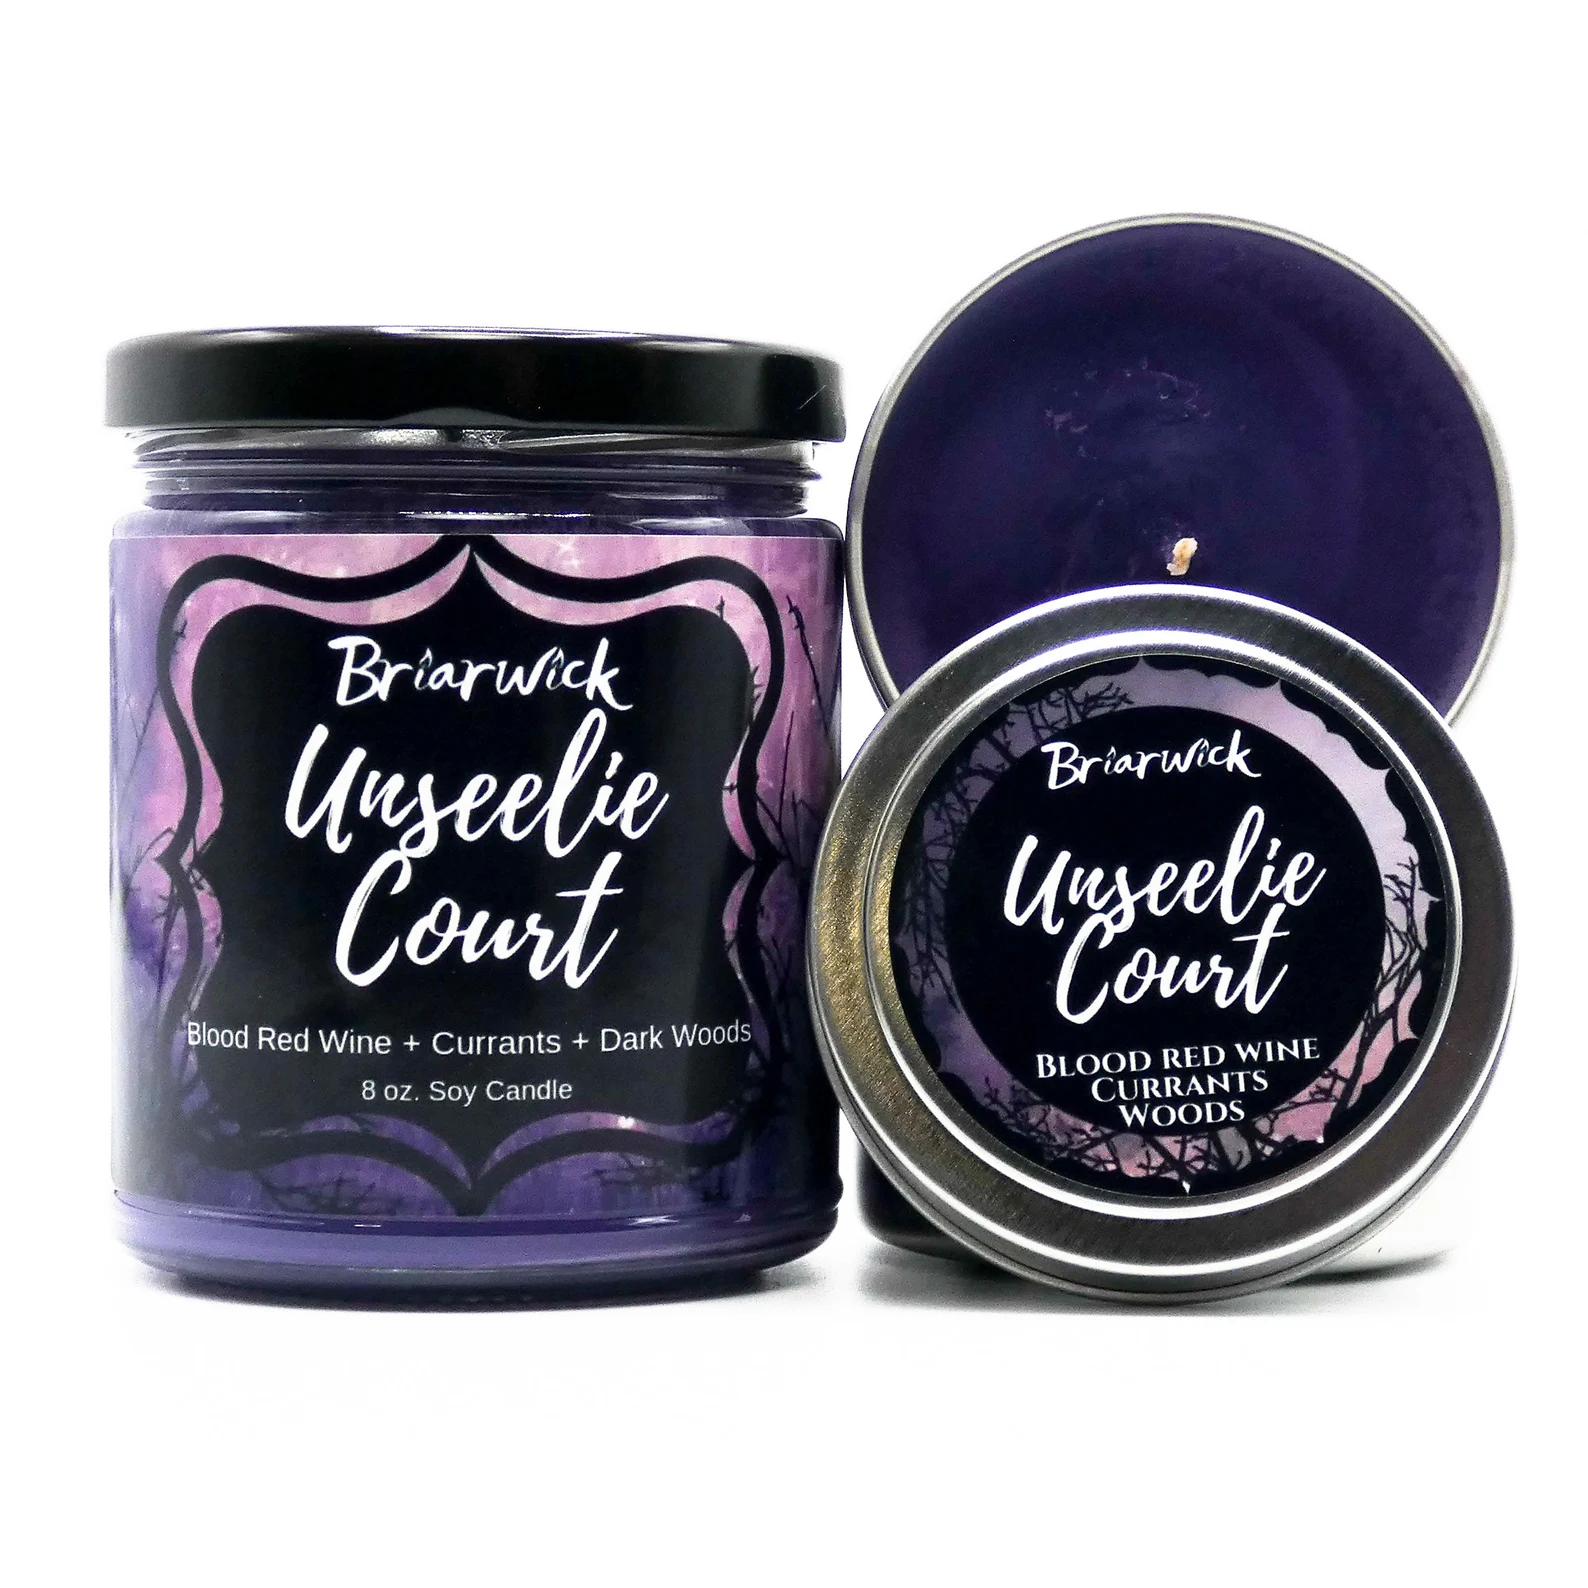 A larger purple candle in a clear glass jar sits next to a purple candle in a metal tin with the matching label Unseelie Court.